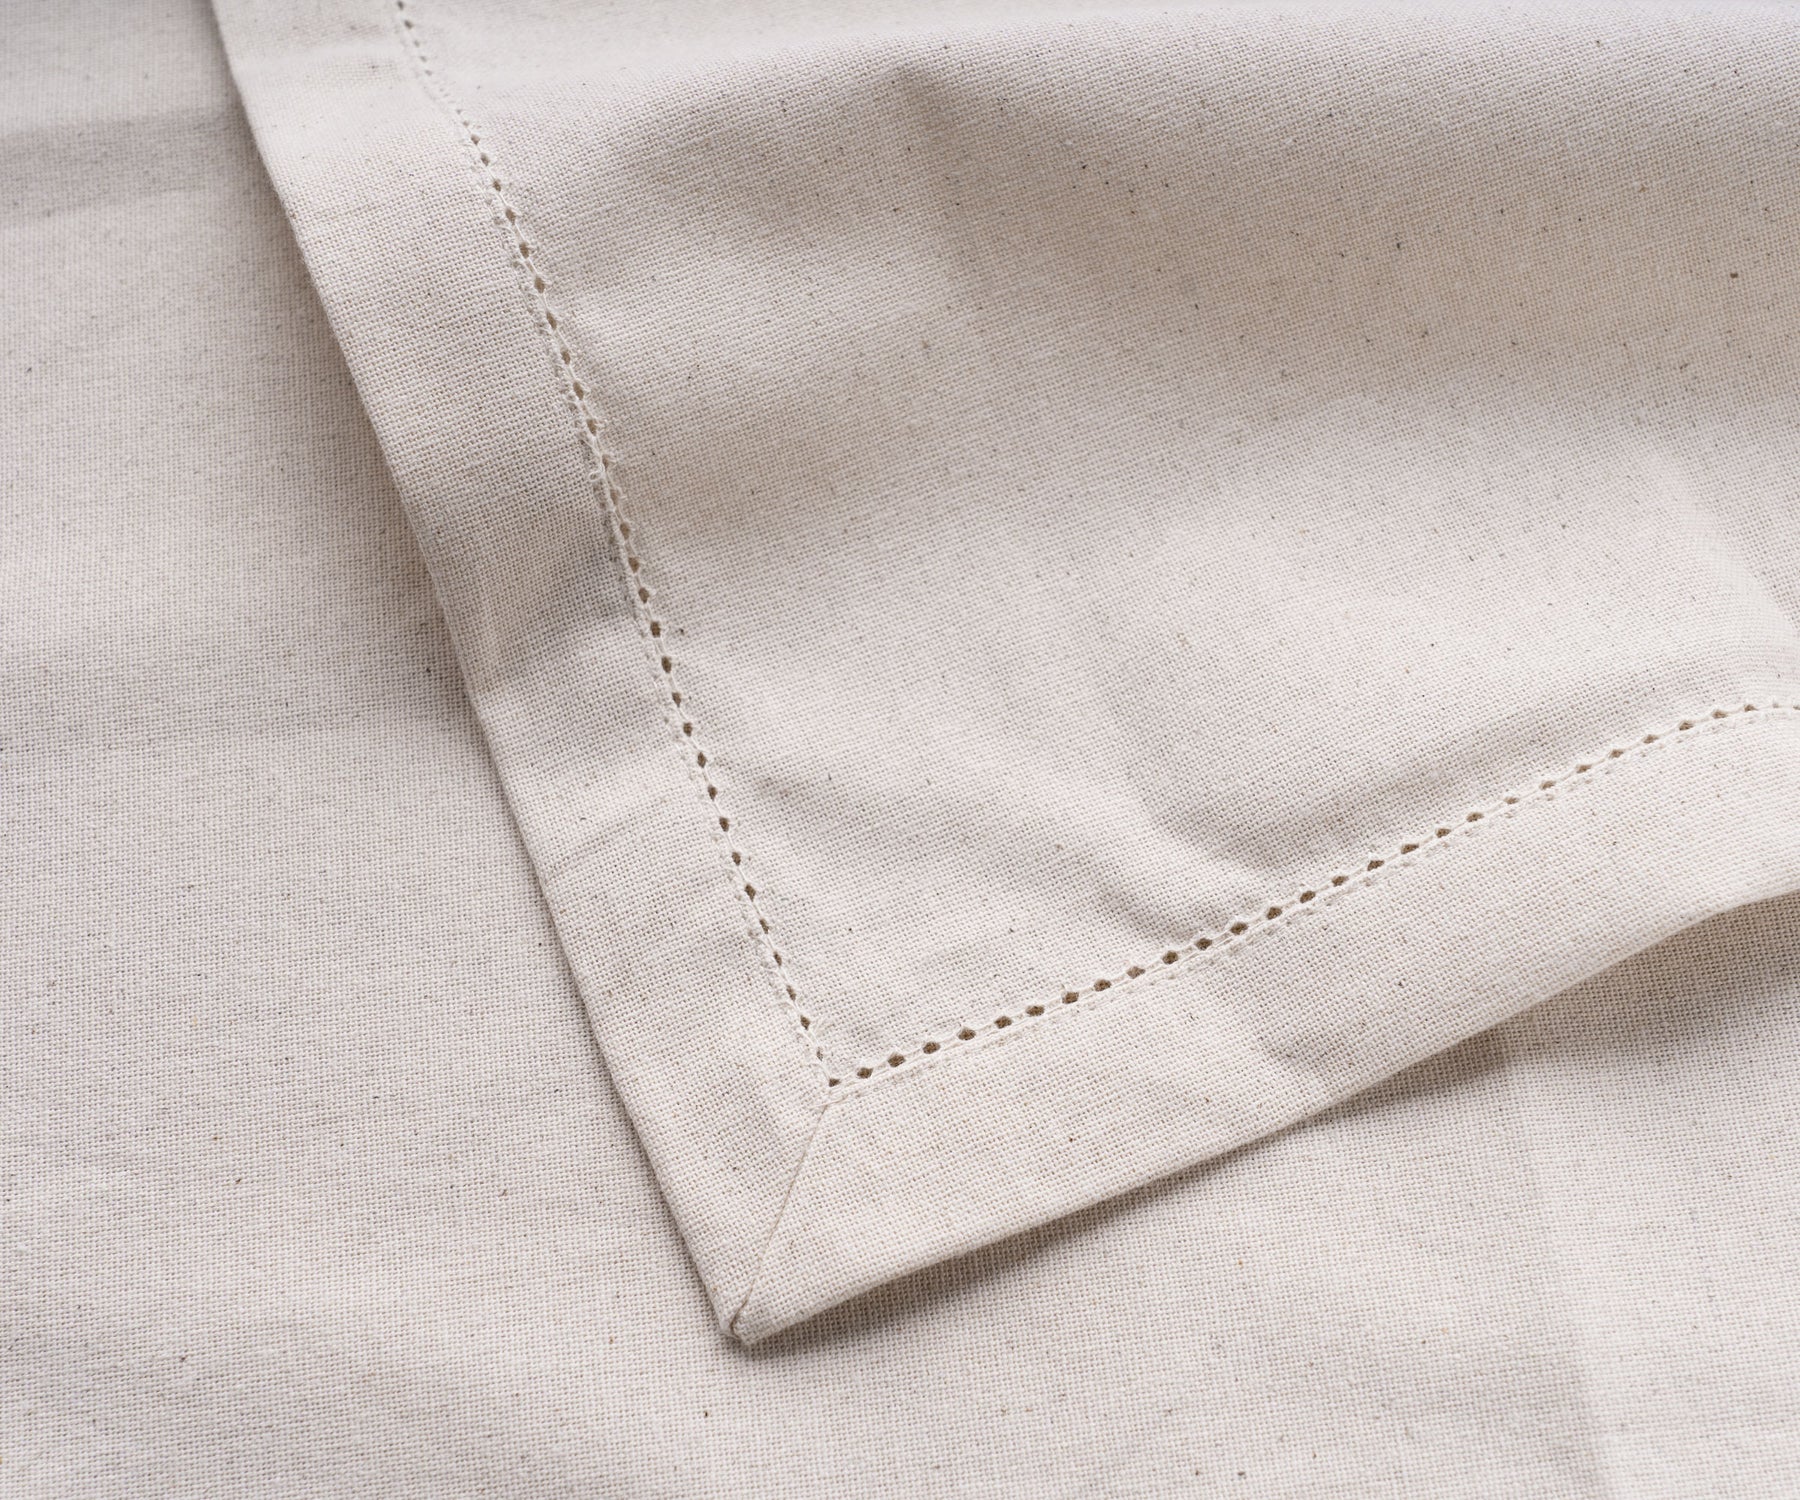 natural table napkins can be tailored to suit different table settings